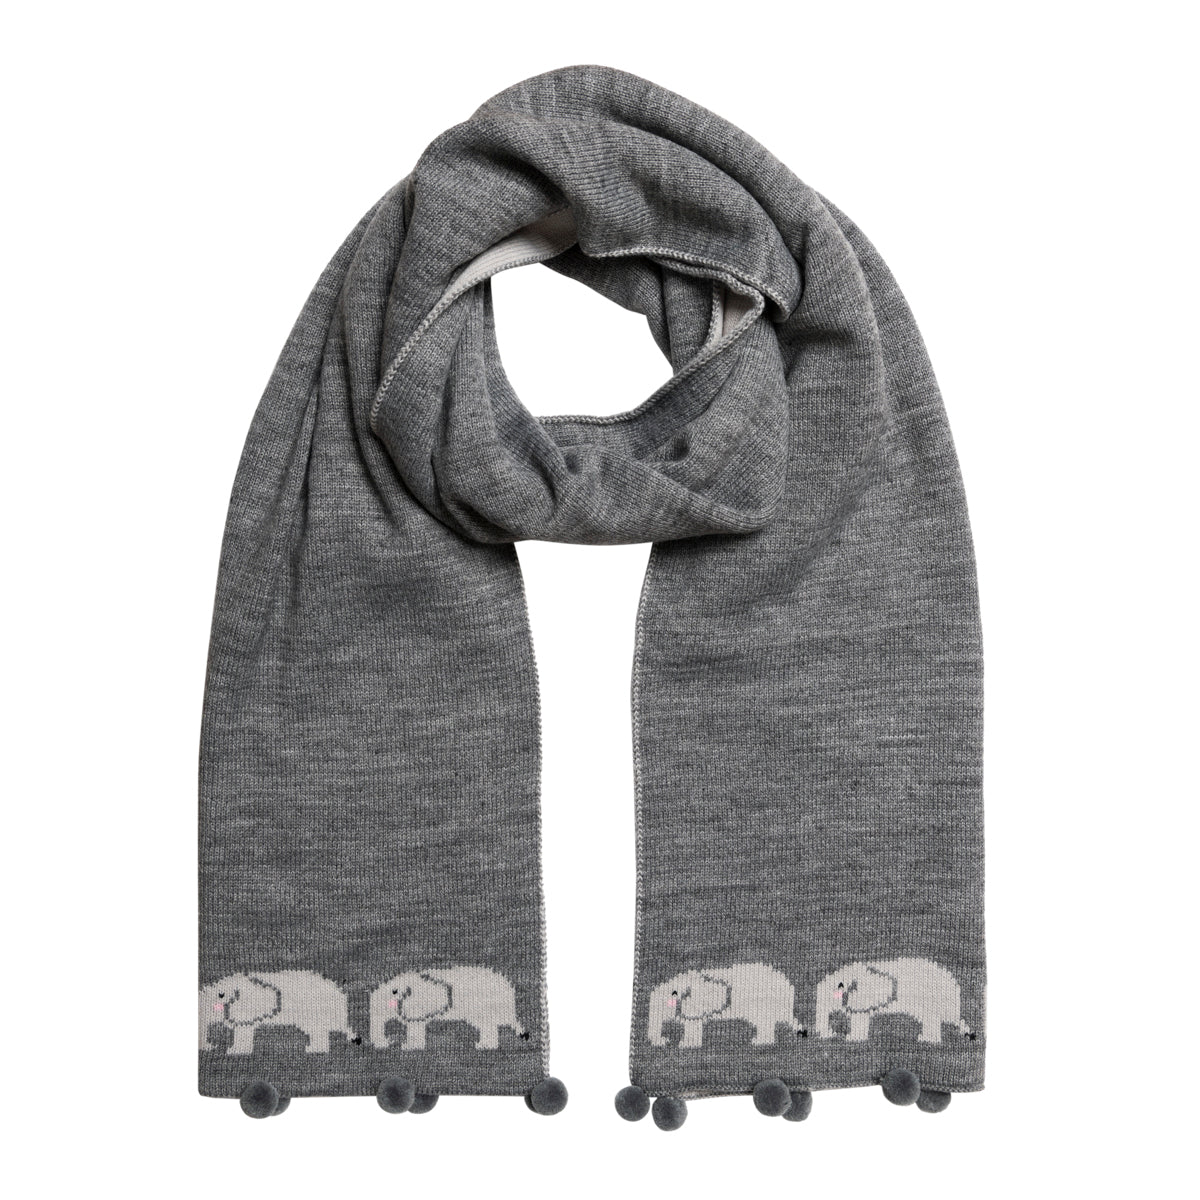 Elephant Knitted Scarf